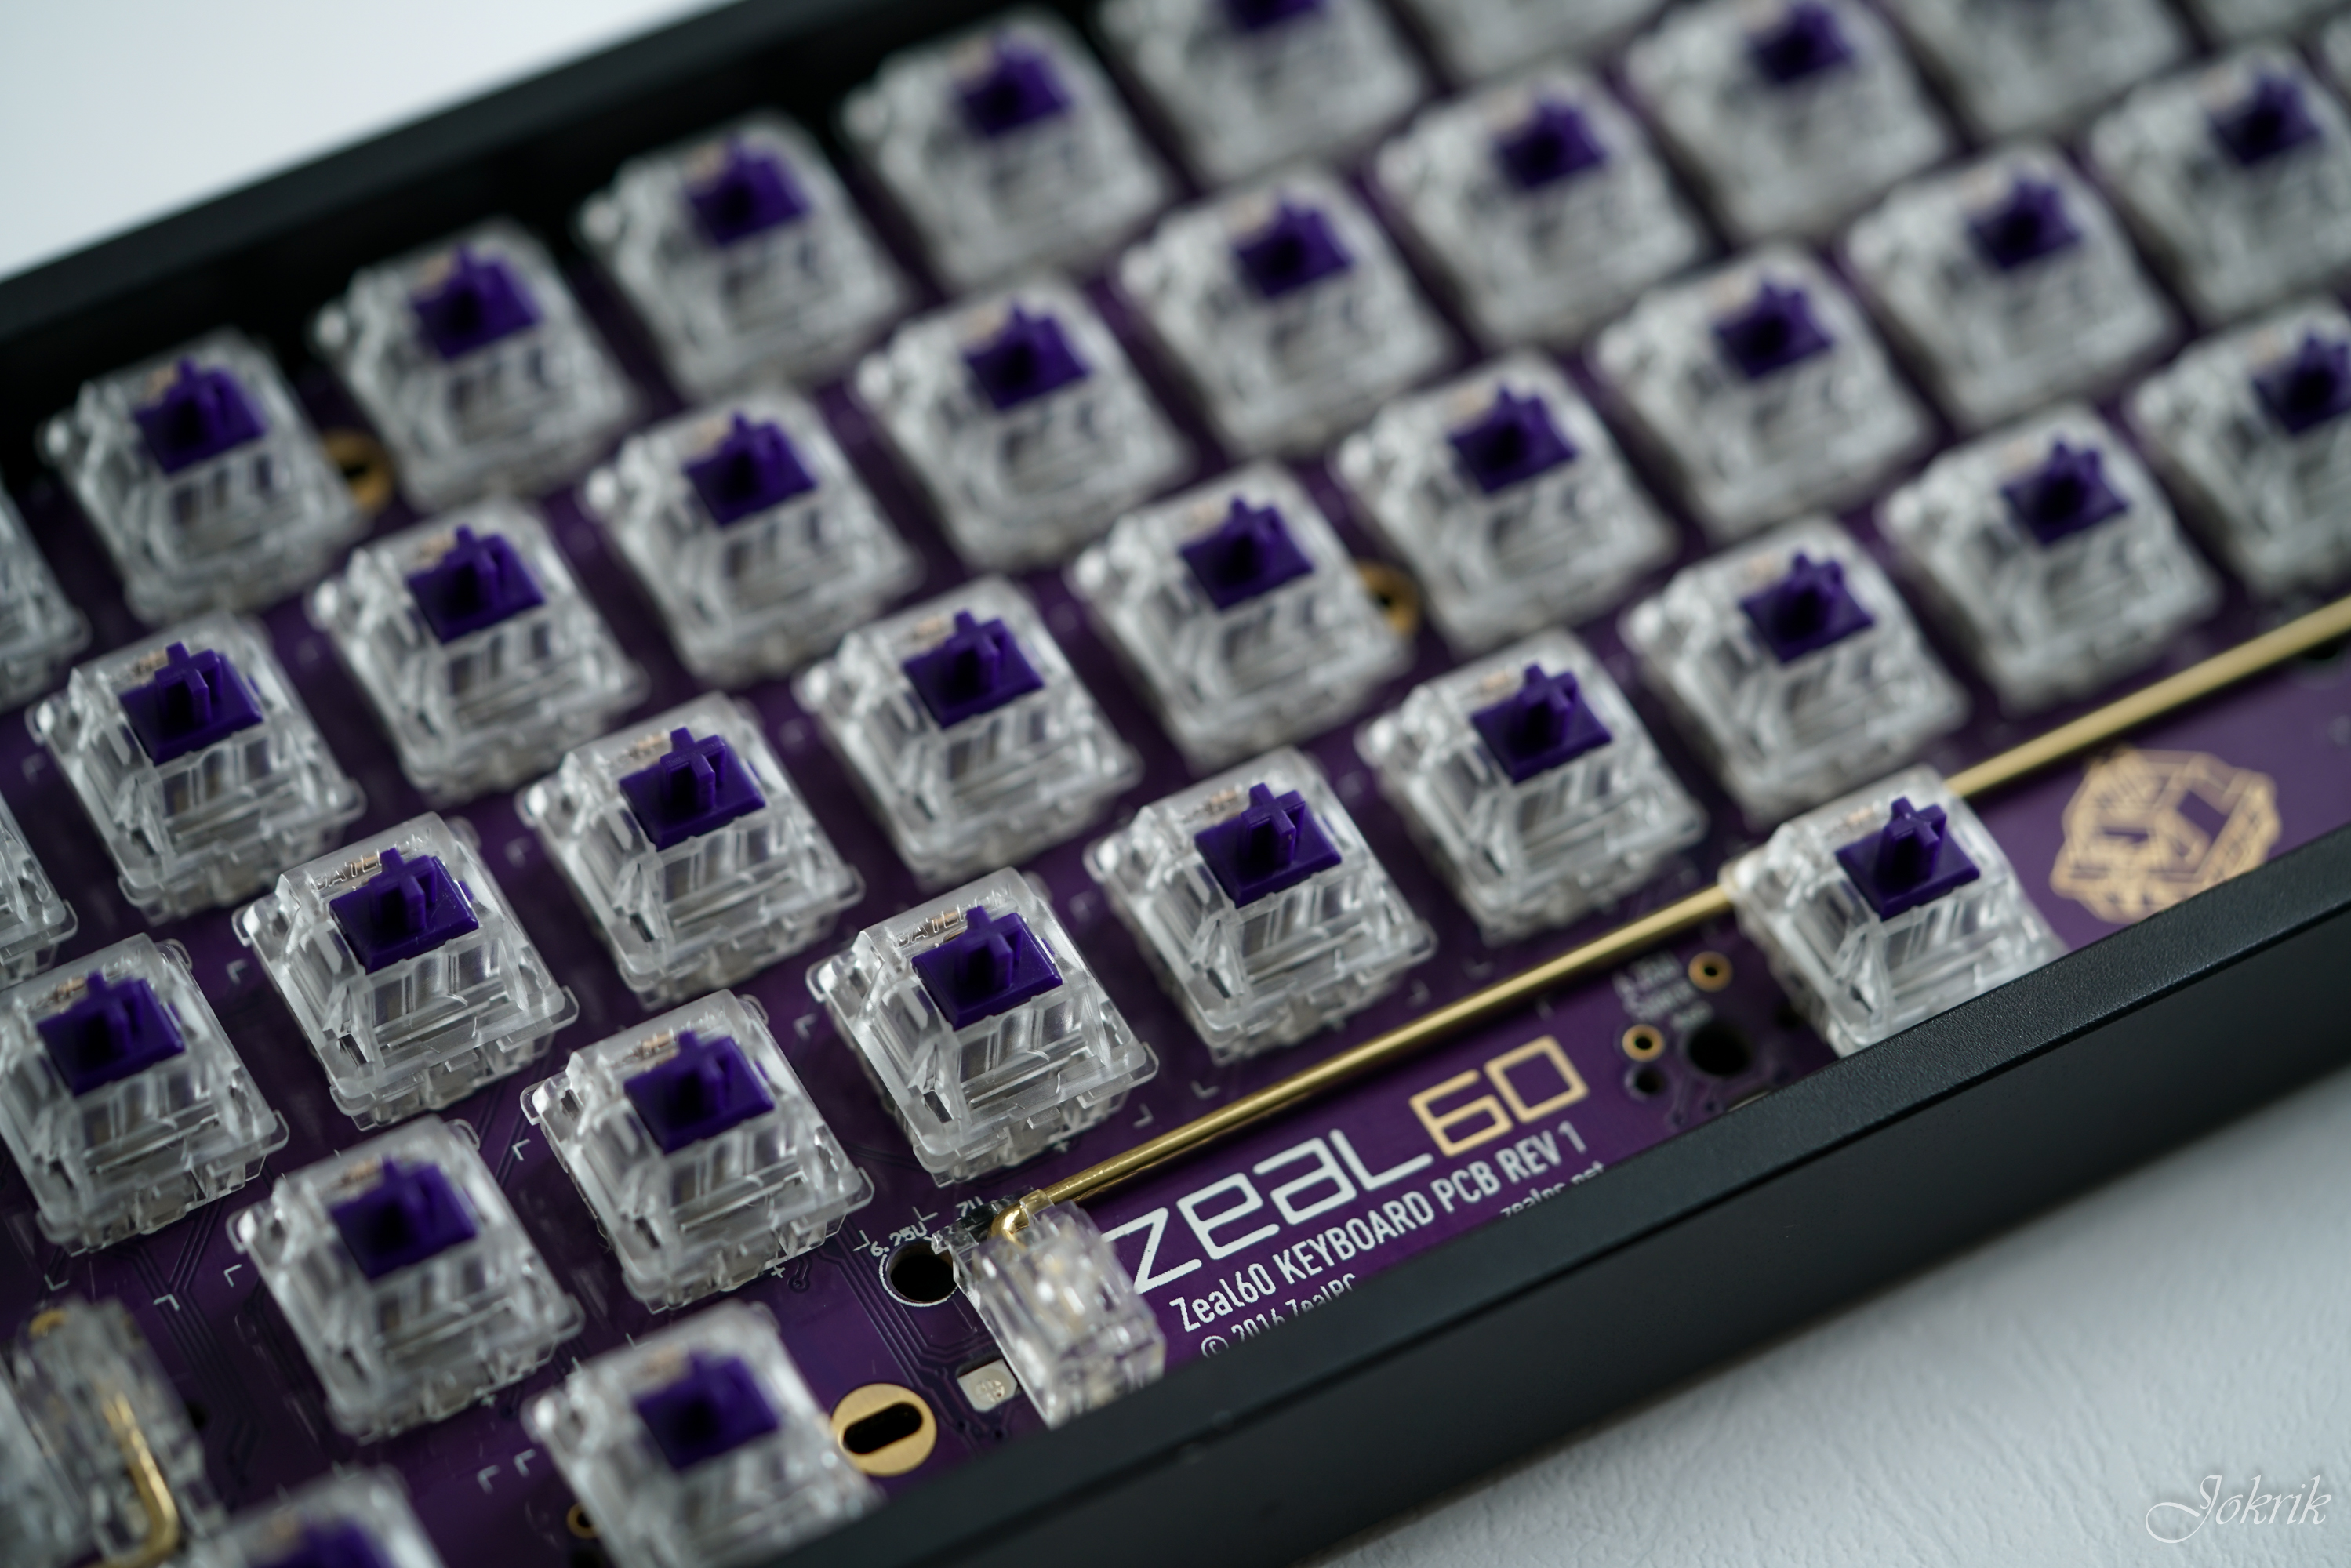 3 3 Zeal 3 3. The pcb is so beautiful, and a perfect case for such beauty. 